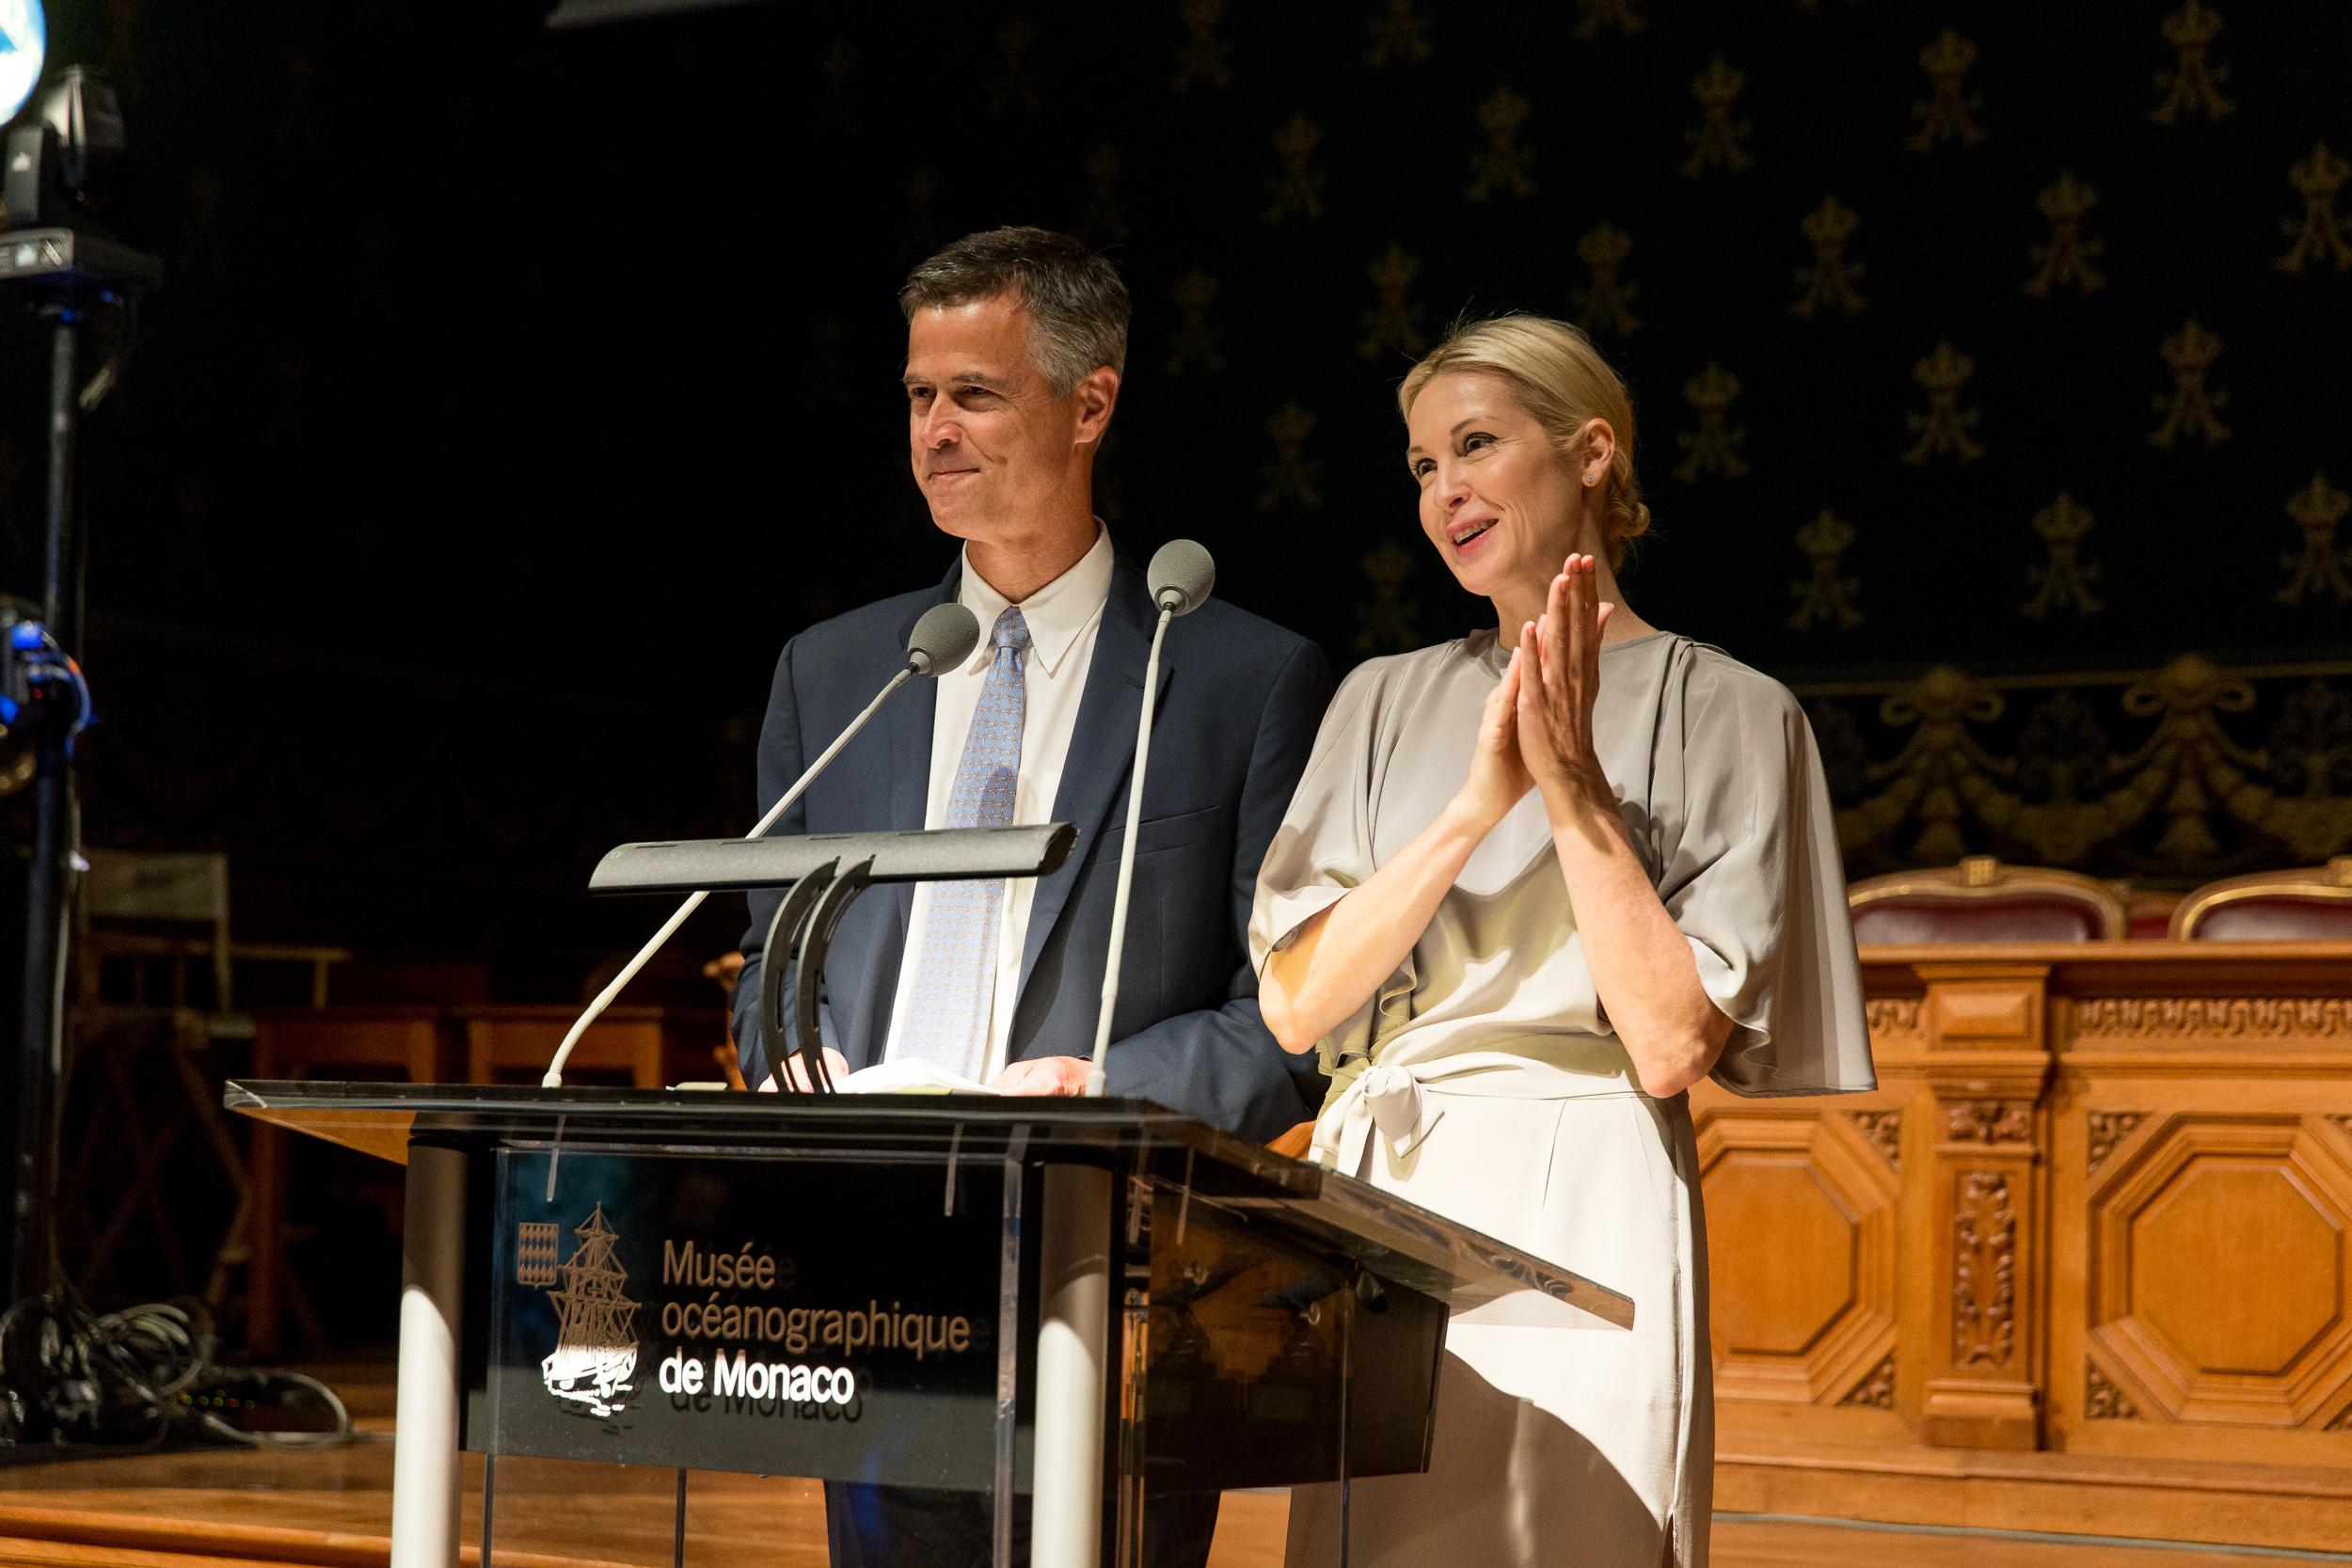 Kelly Rutherford, of Gossip Girl, and Jim Toomey, creator of Sherman's Lagoon host BLUE2015